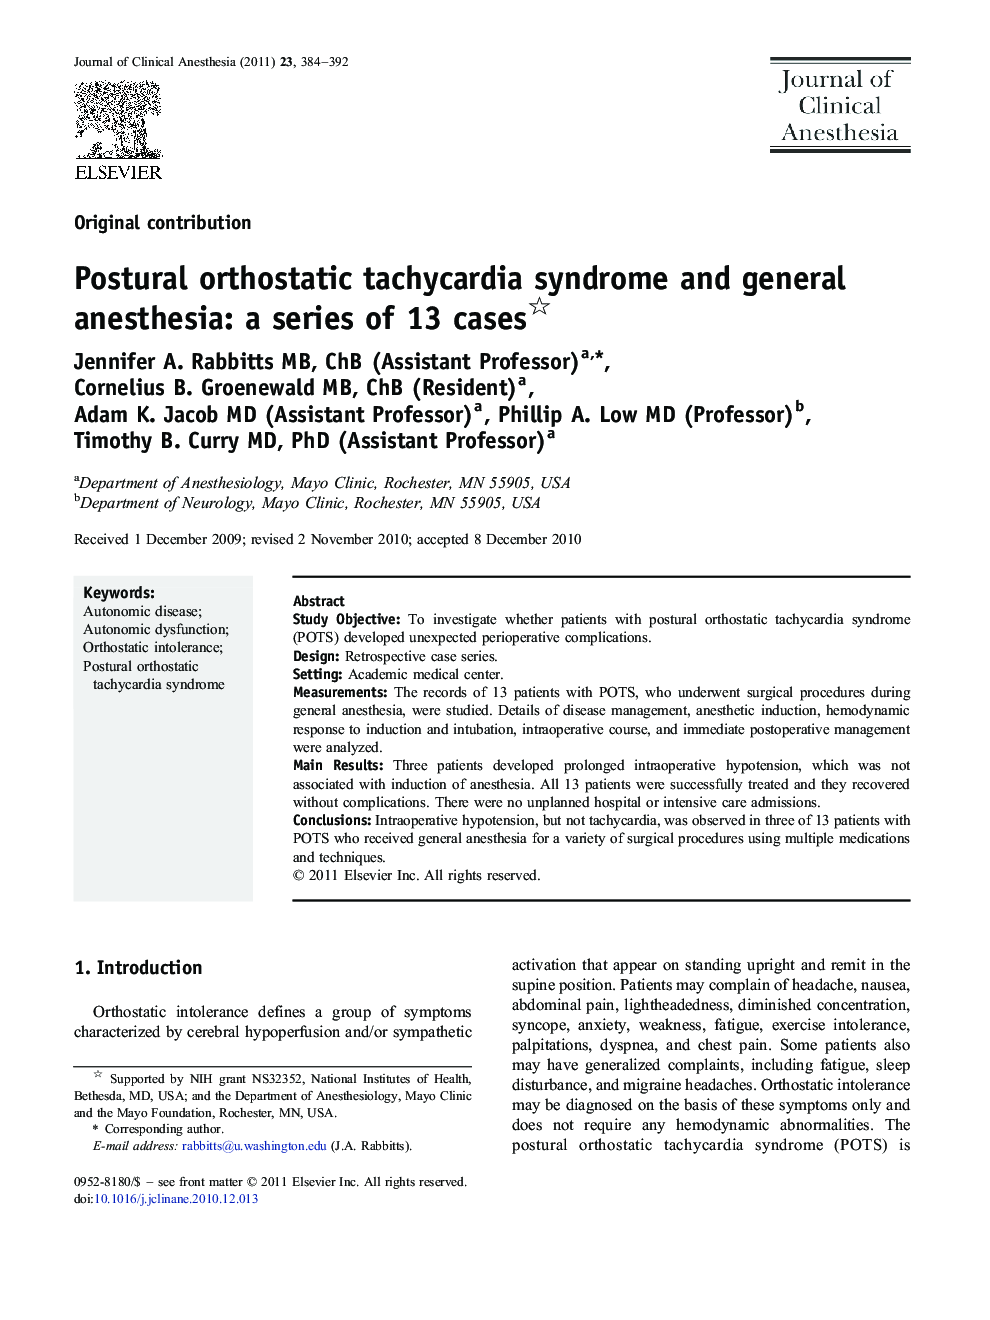 Postural orthostatic tachycardia syndrome and general anesthesia: a series of 13 cases 